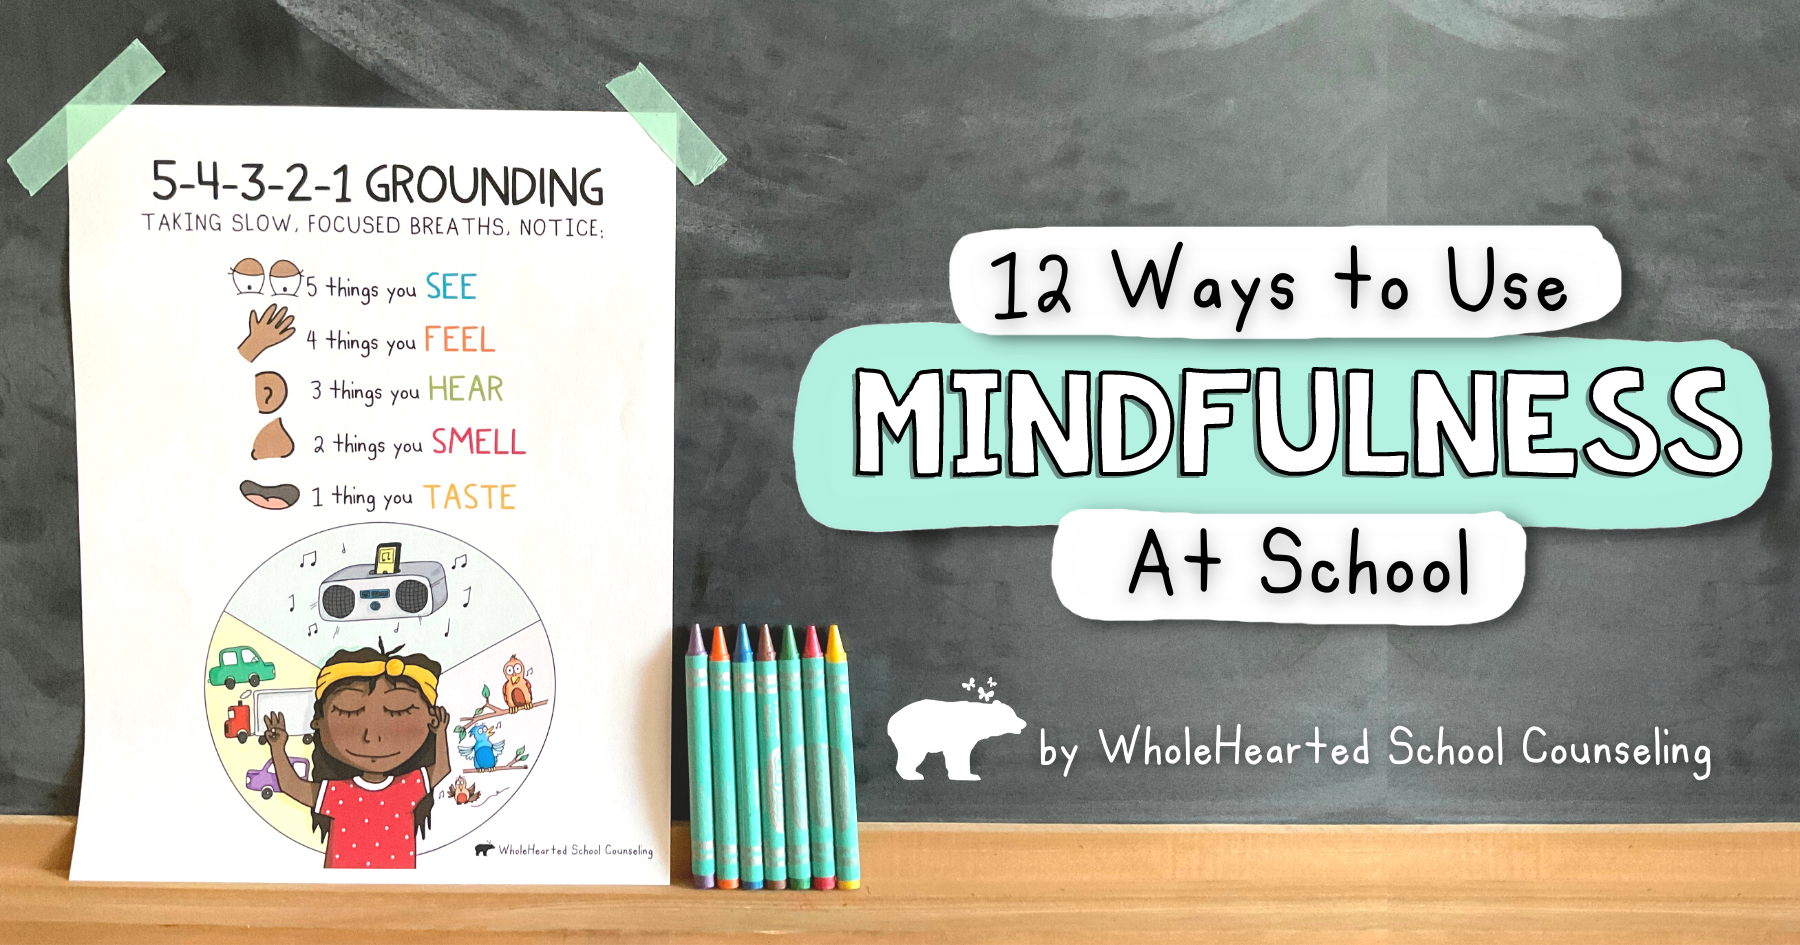 Chalkboard with crayons and mindfulness poster for kids to use at school